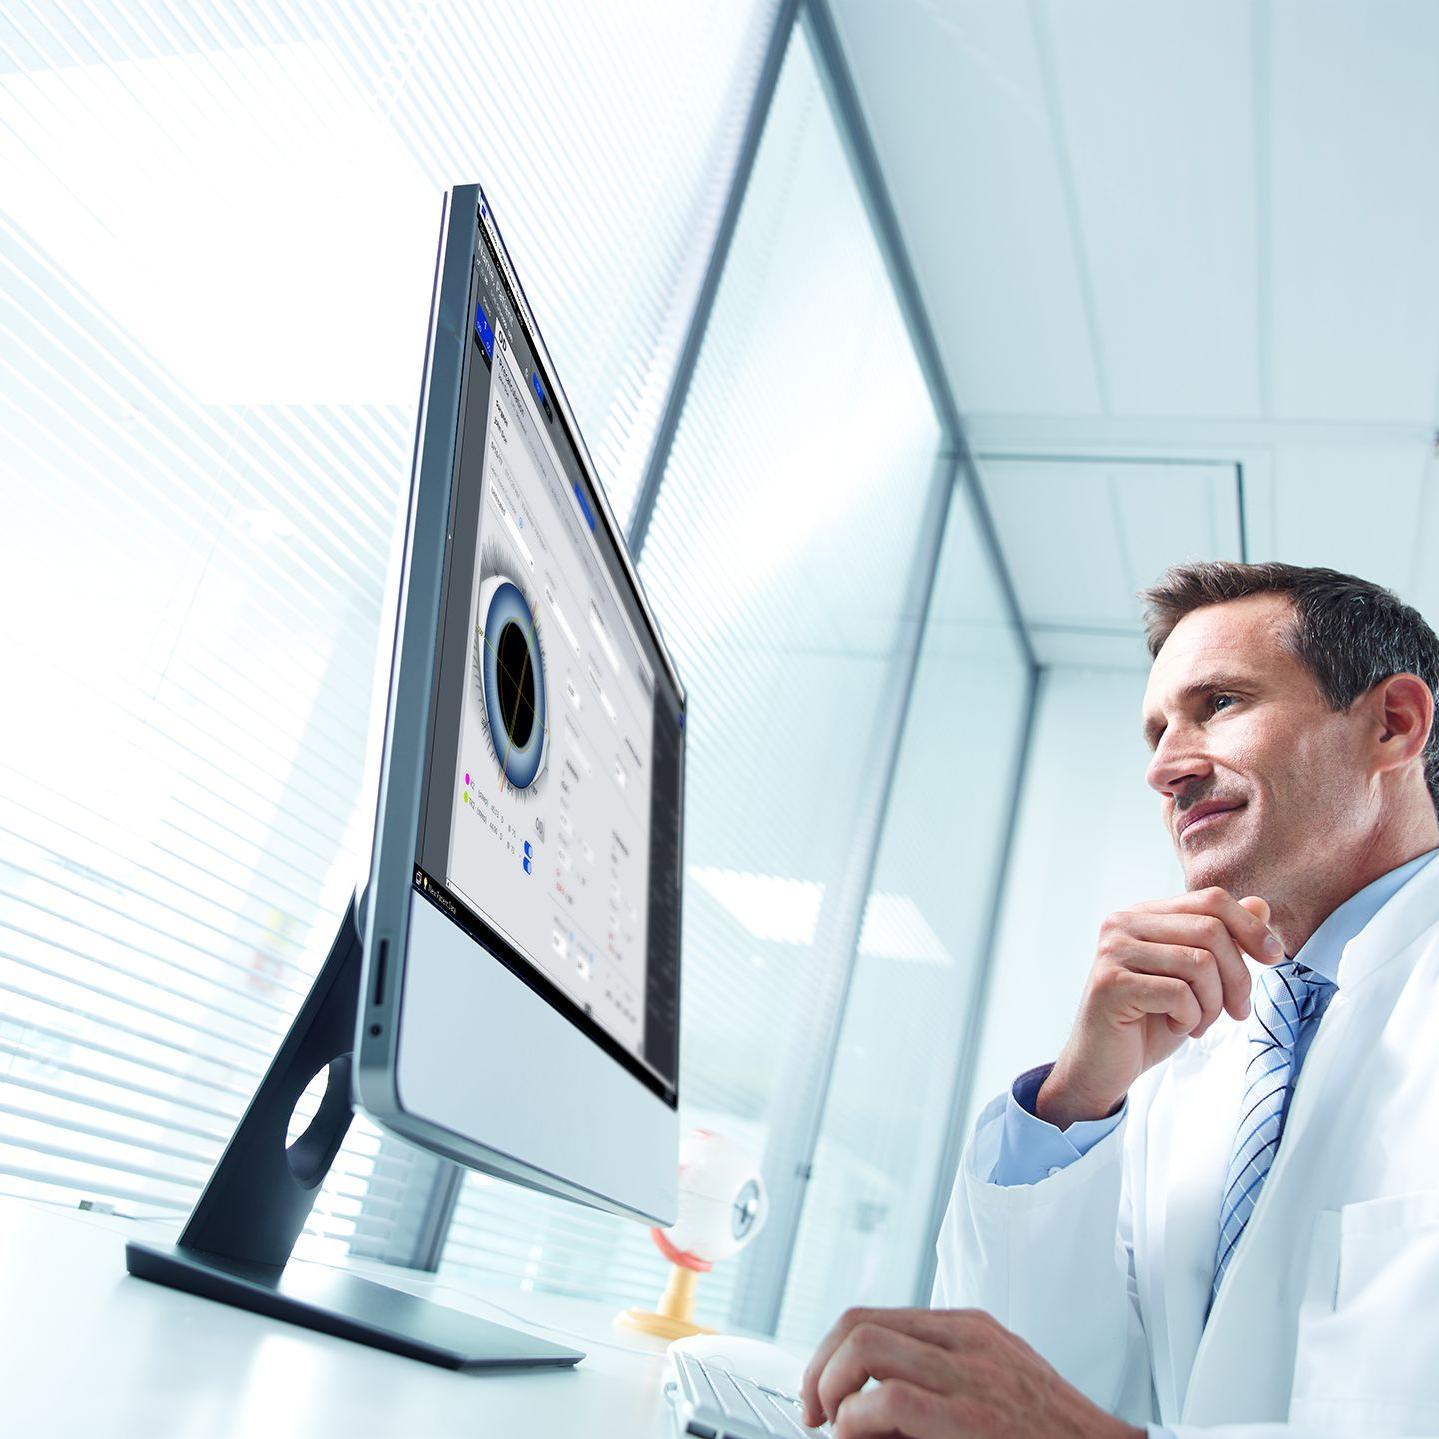 Man in lab coat looks at screen showing eye measurement software. 